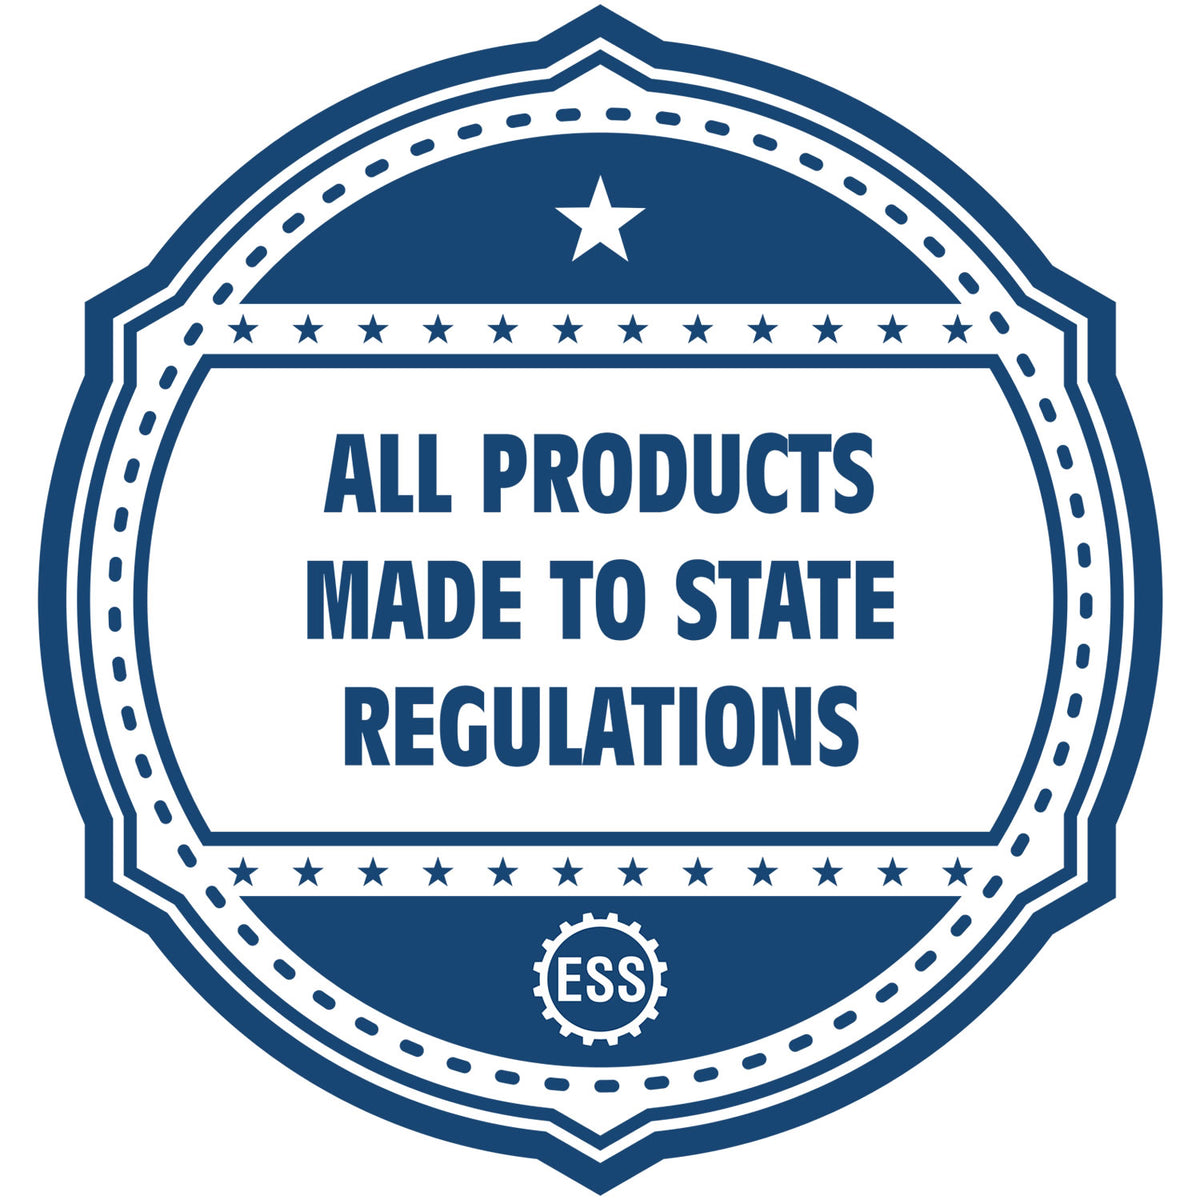 A blue icon or badge for the Self-Inking South Dakota Geologist Stamp showing that this product is made in compliance with state regulations.